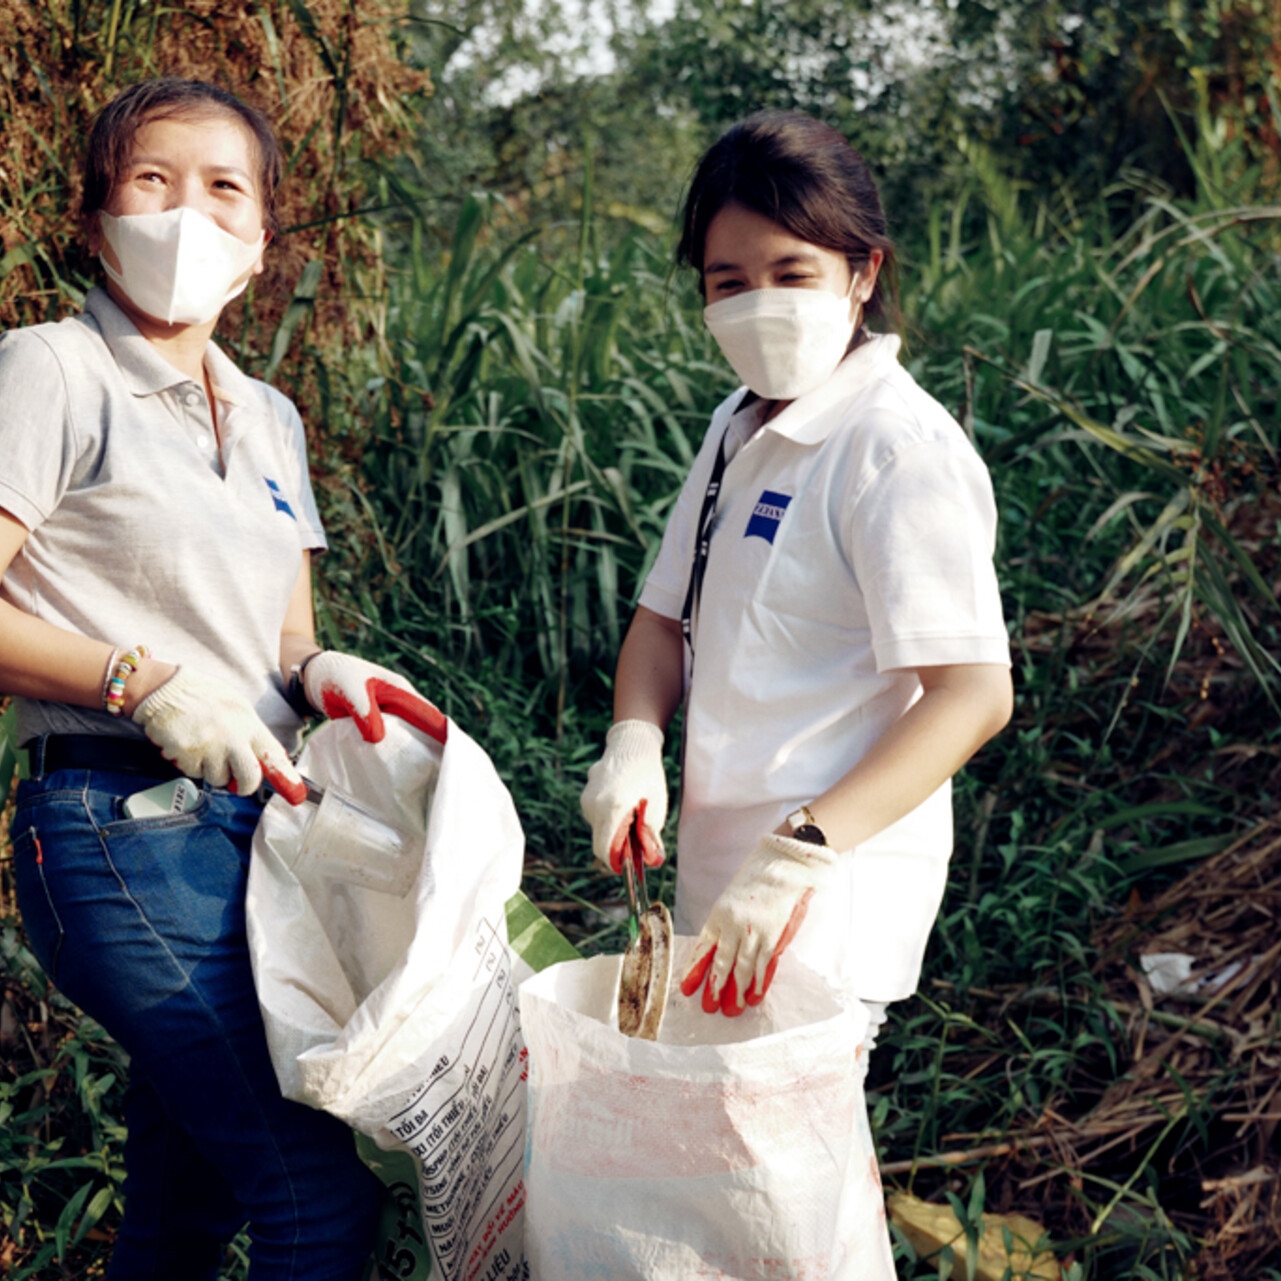 ZEISS employees in Vietnam (Ho Chi Minh & Hanoi) picking up litter on earth day